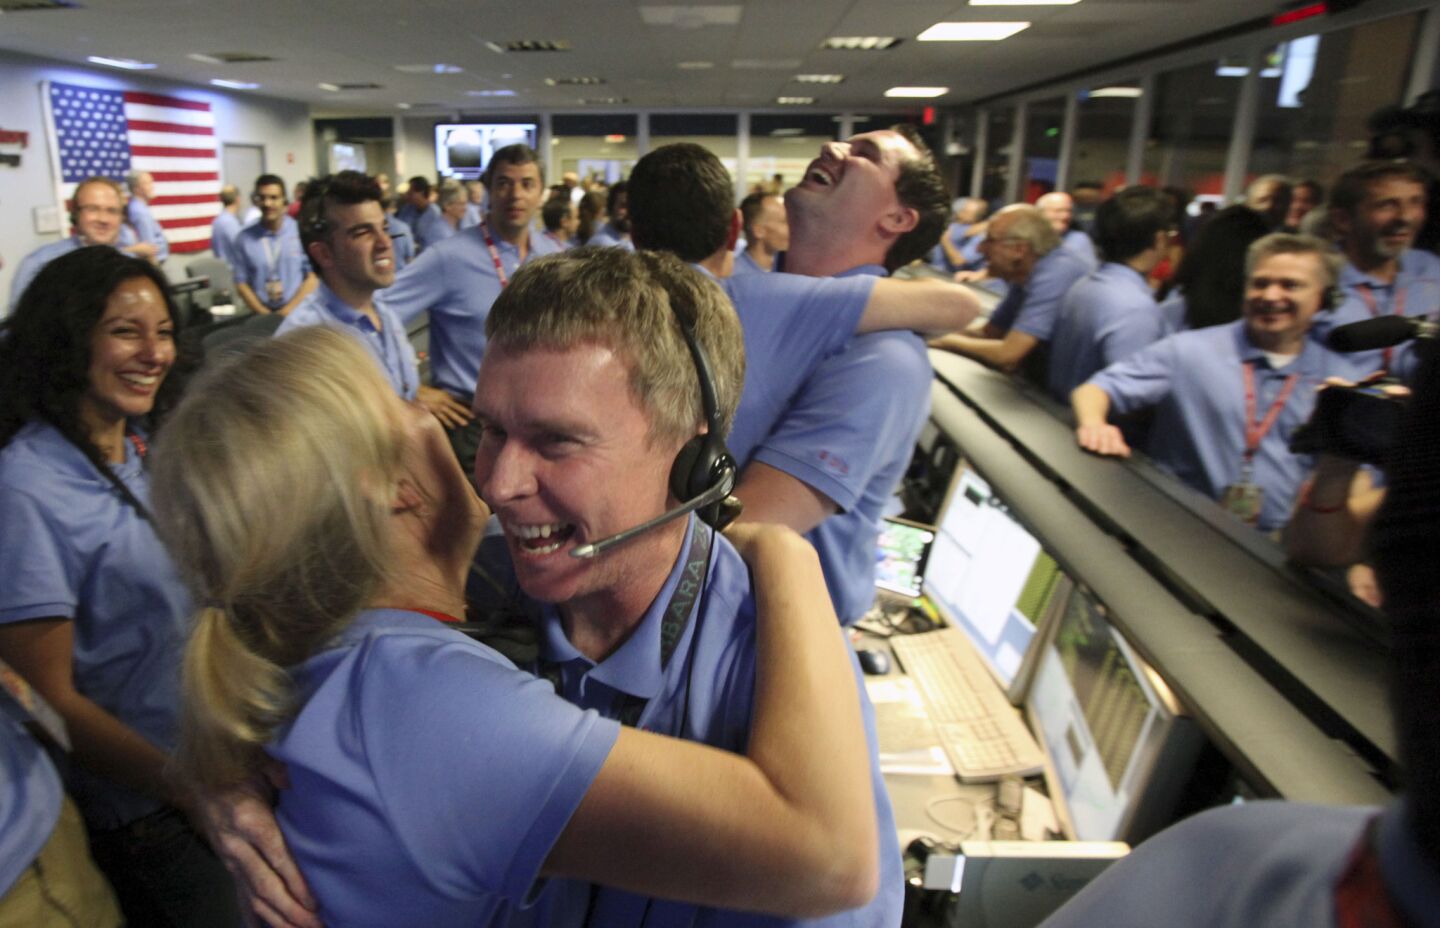 NASA employees express joy after establishing connection with Curiosity on Mars.